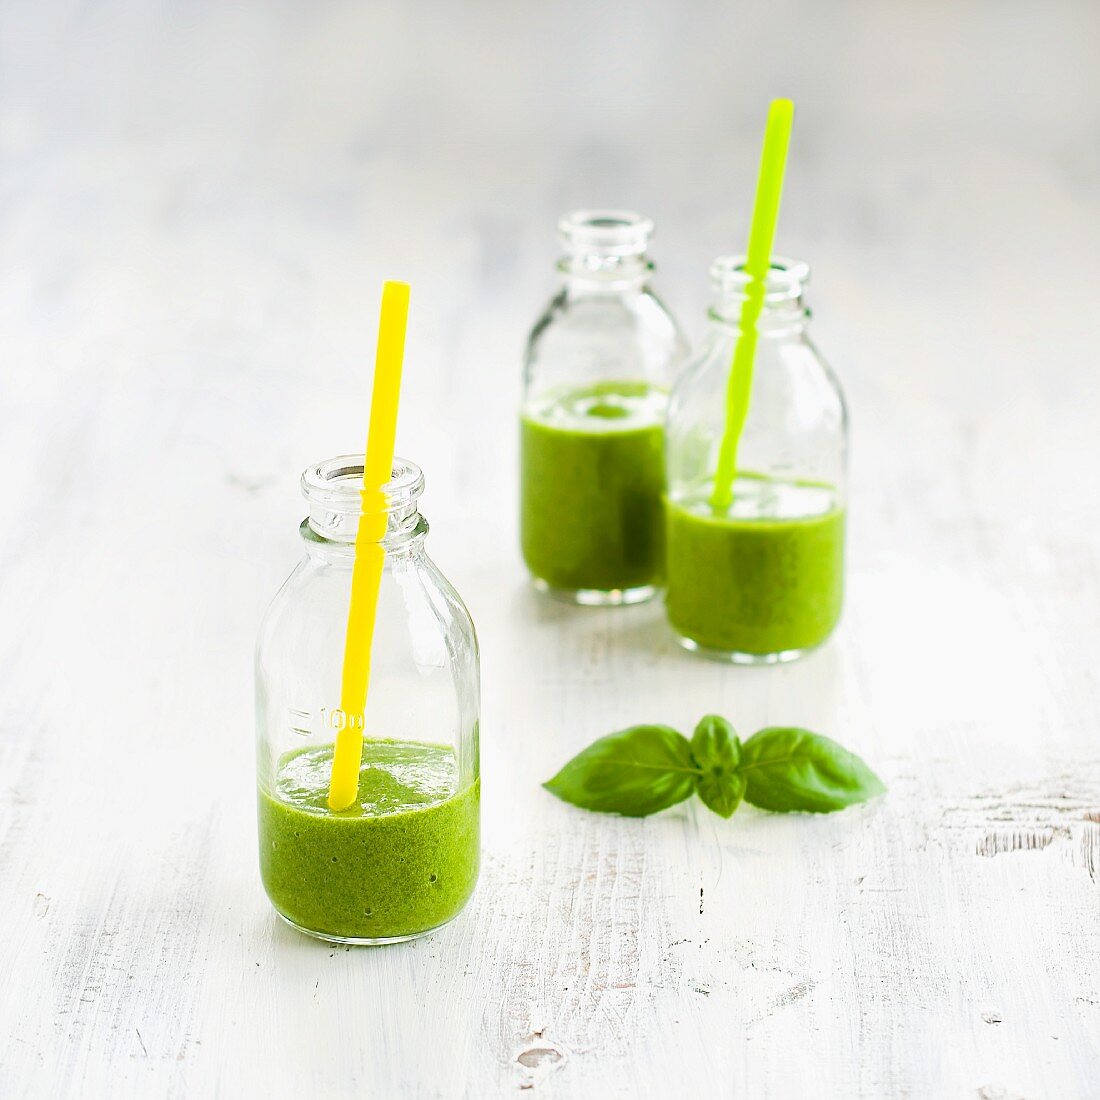 Smoothie made with spinach and basil